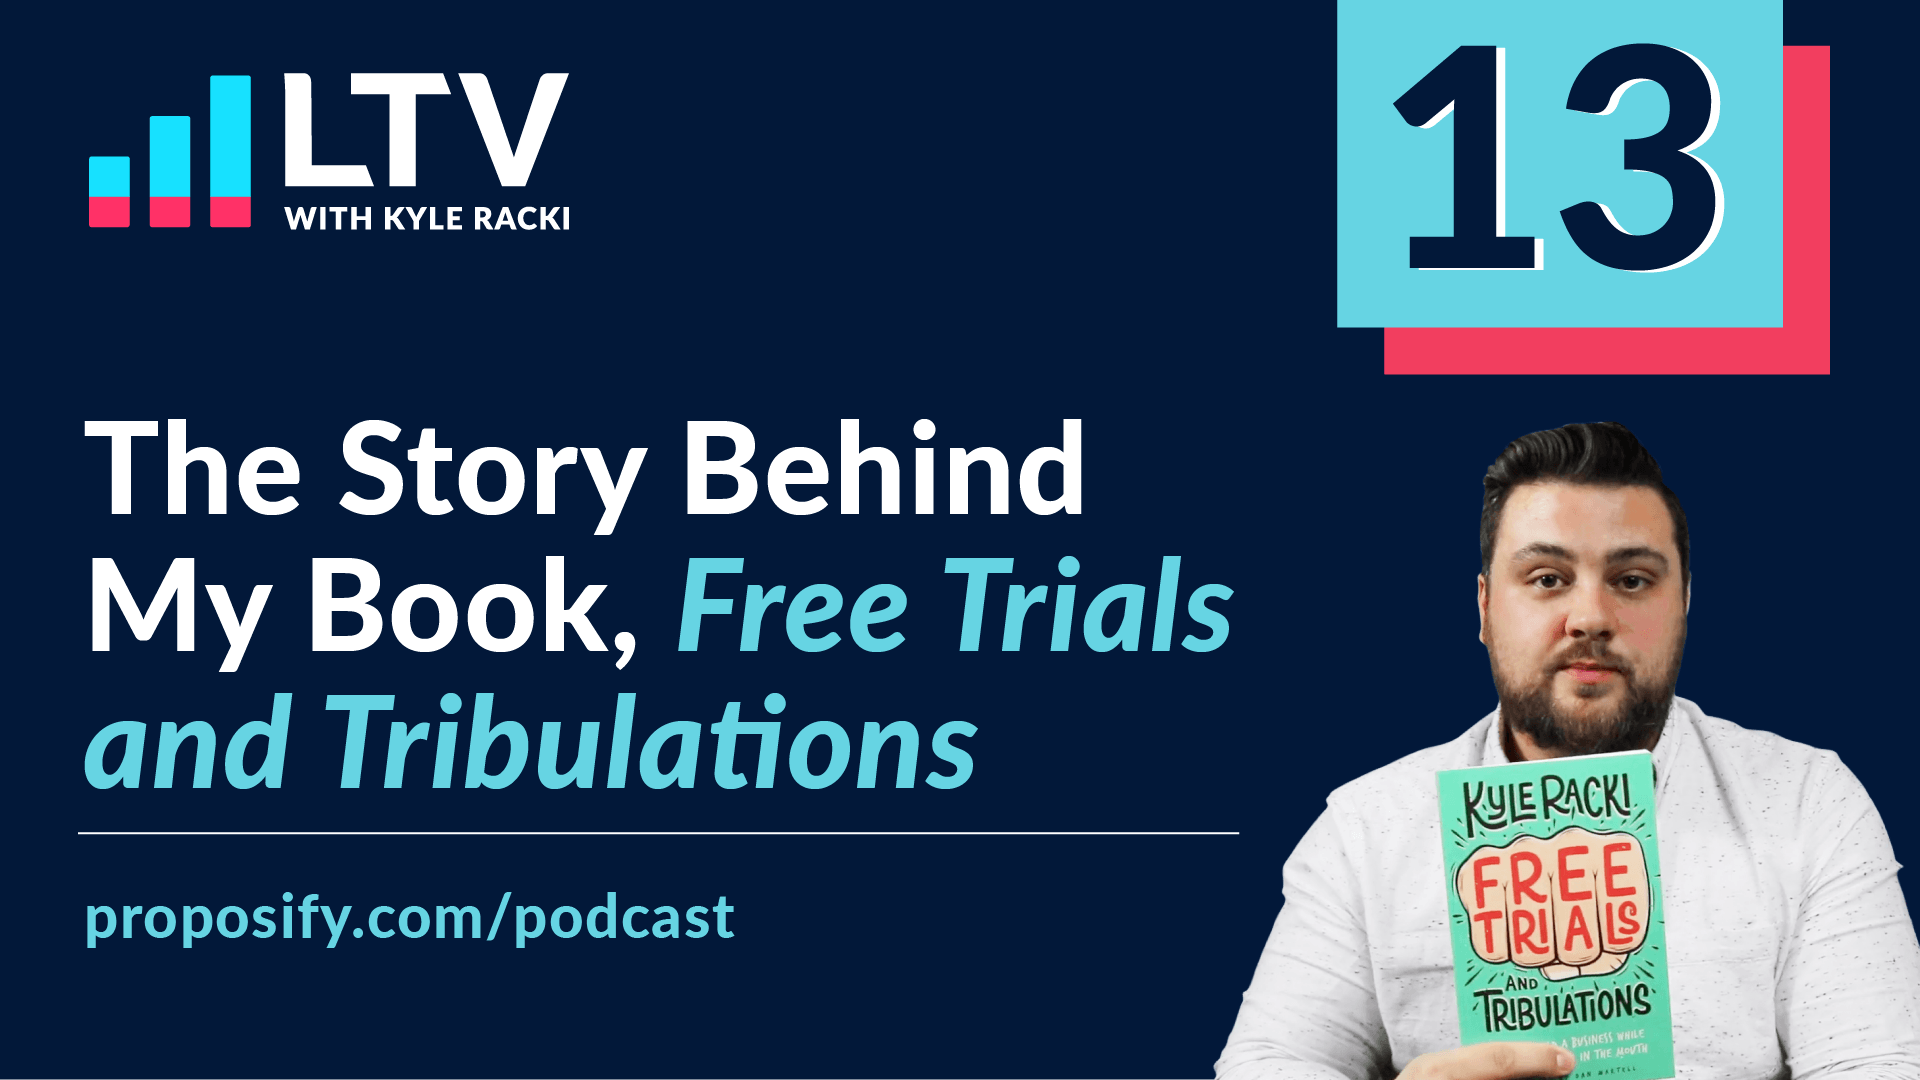 LTV Podcast Episode 13: The Story Behind My Book, Free Trials and Tribulations